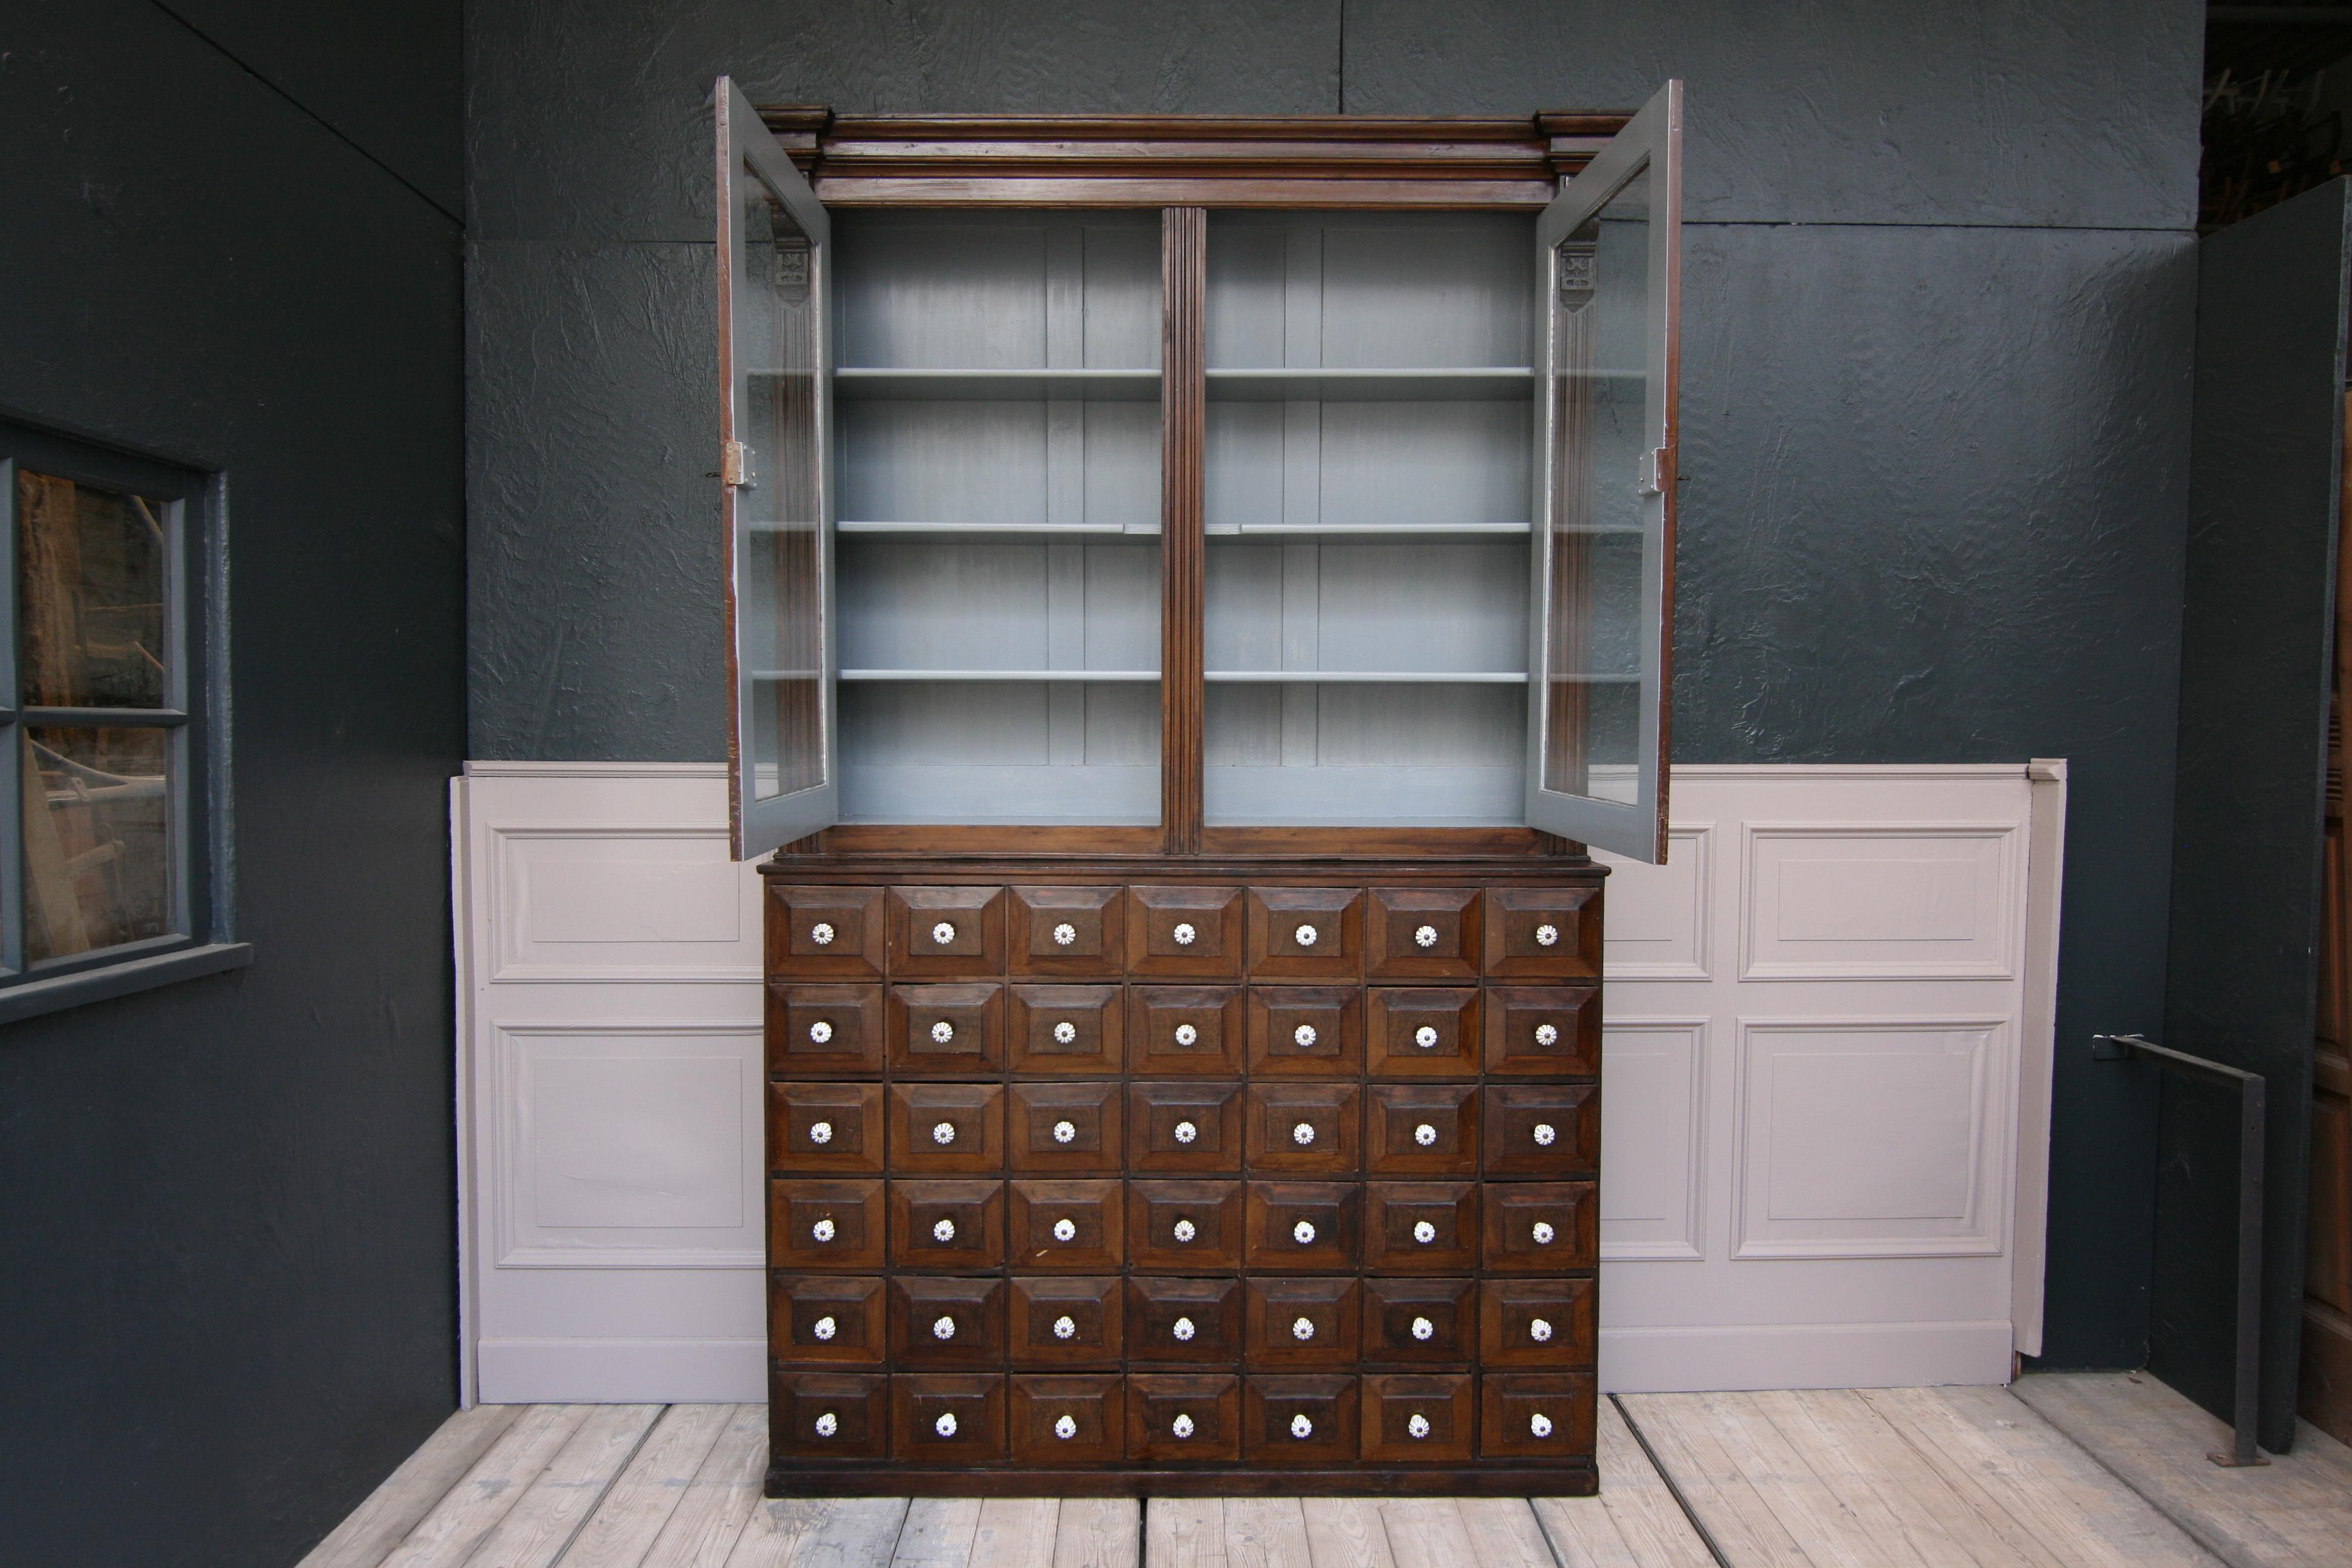 Fir 19th Century German Apothecary Cabinet in Original Paint